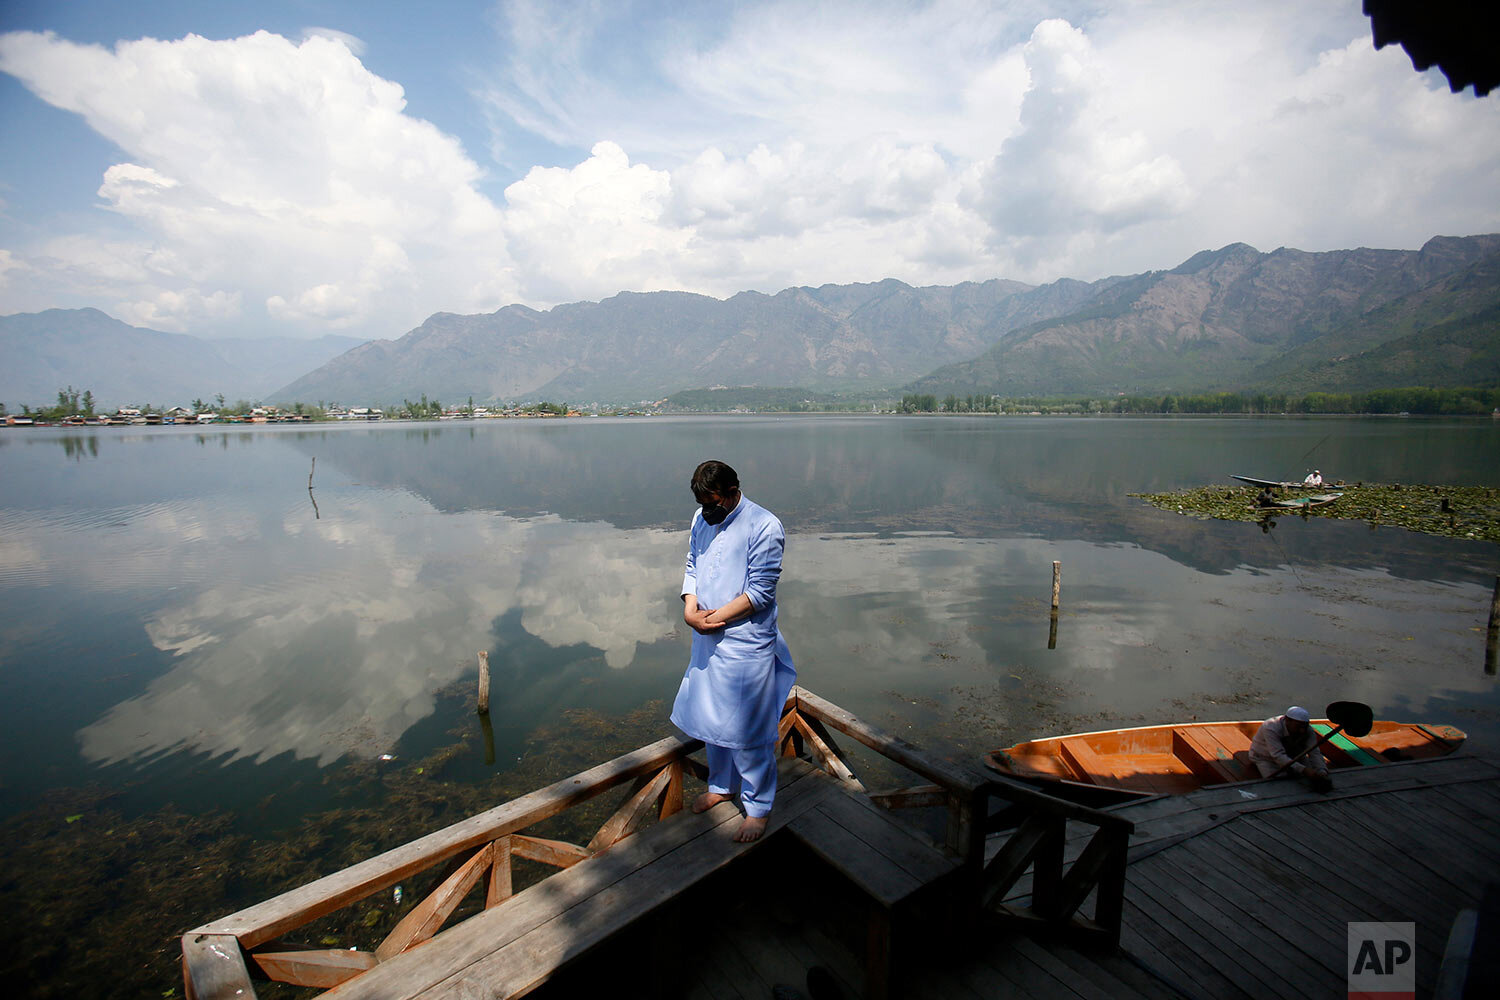  A Kashmiri Muslim man offers prayer on the banks of Dal Lake on the second day of Ramadan during lockdown to prevent the spread of the new coronavirus in Srinagar, Indian controlled Kashmir, Sunday, April 26, 2020. . (AP Photo/Mukhtar Khan) 